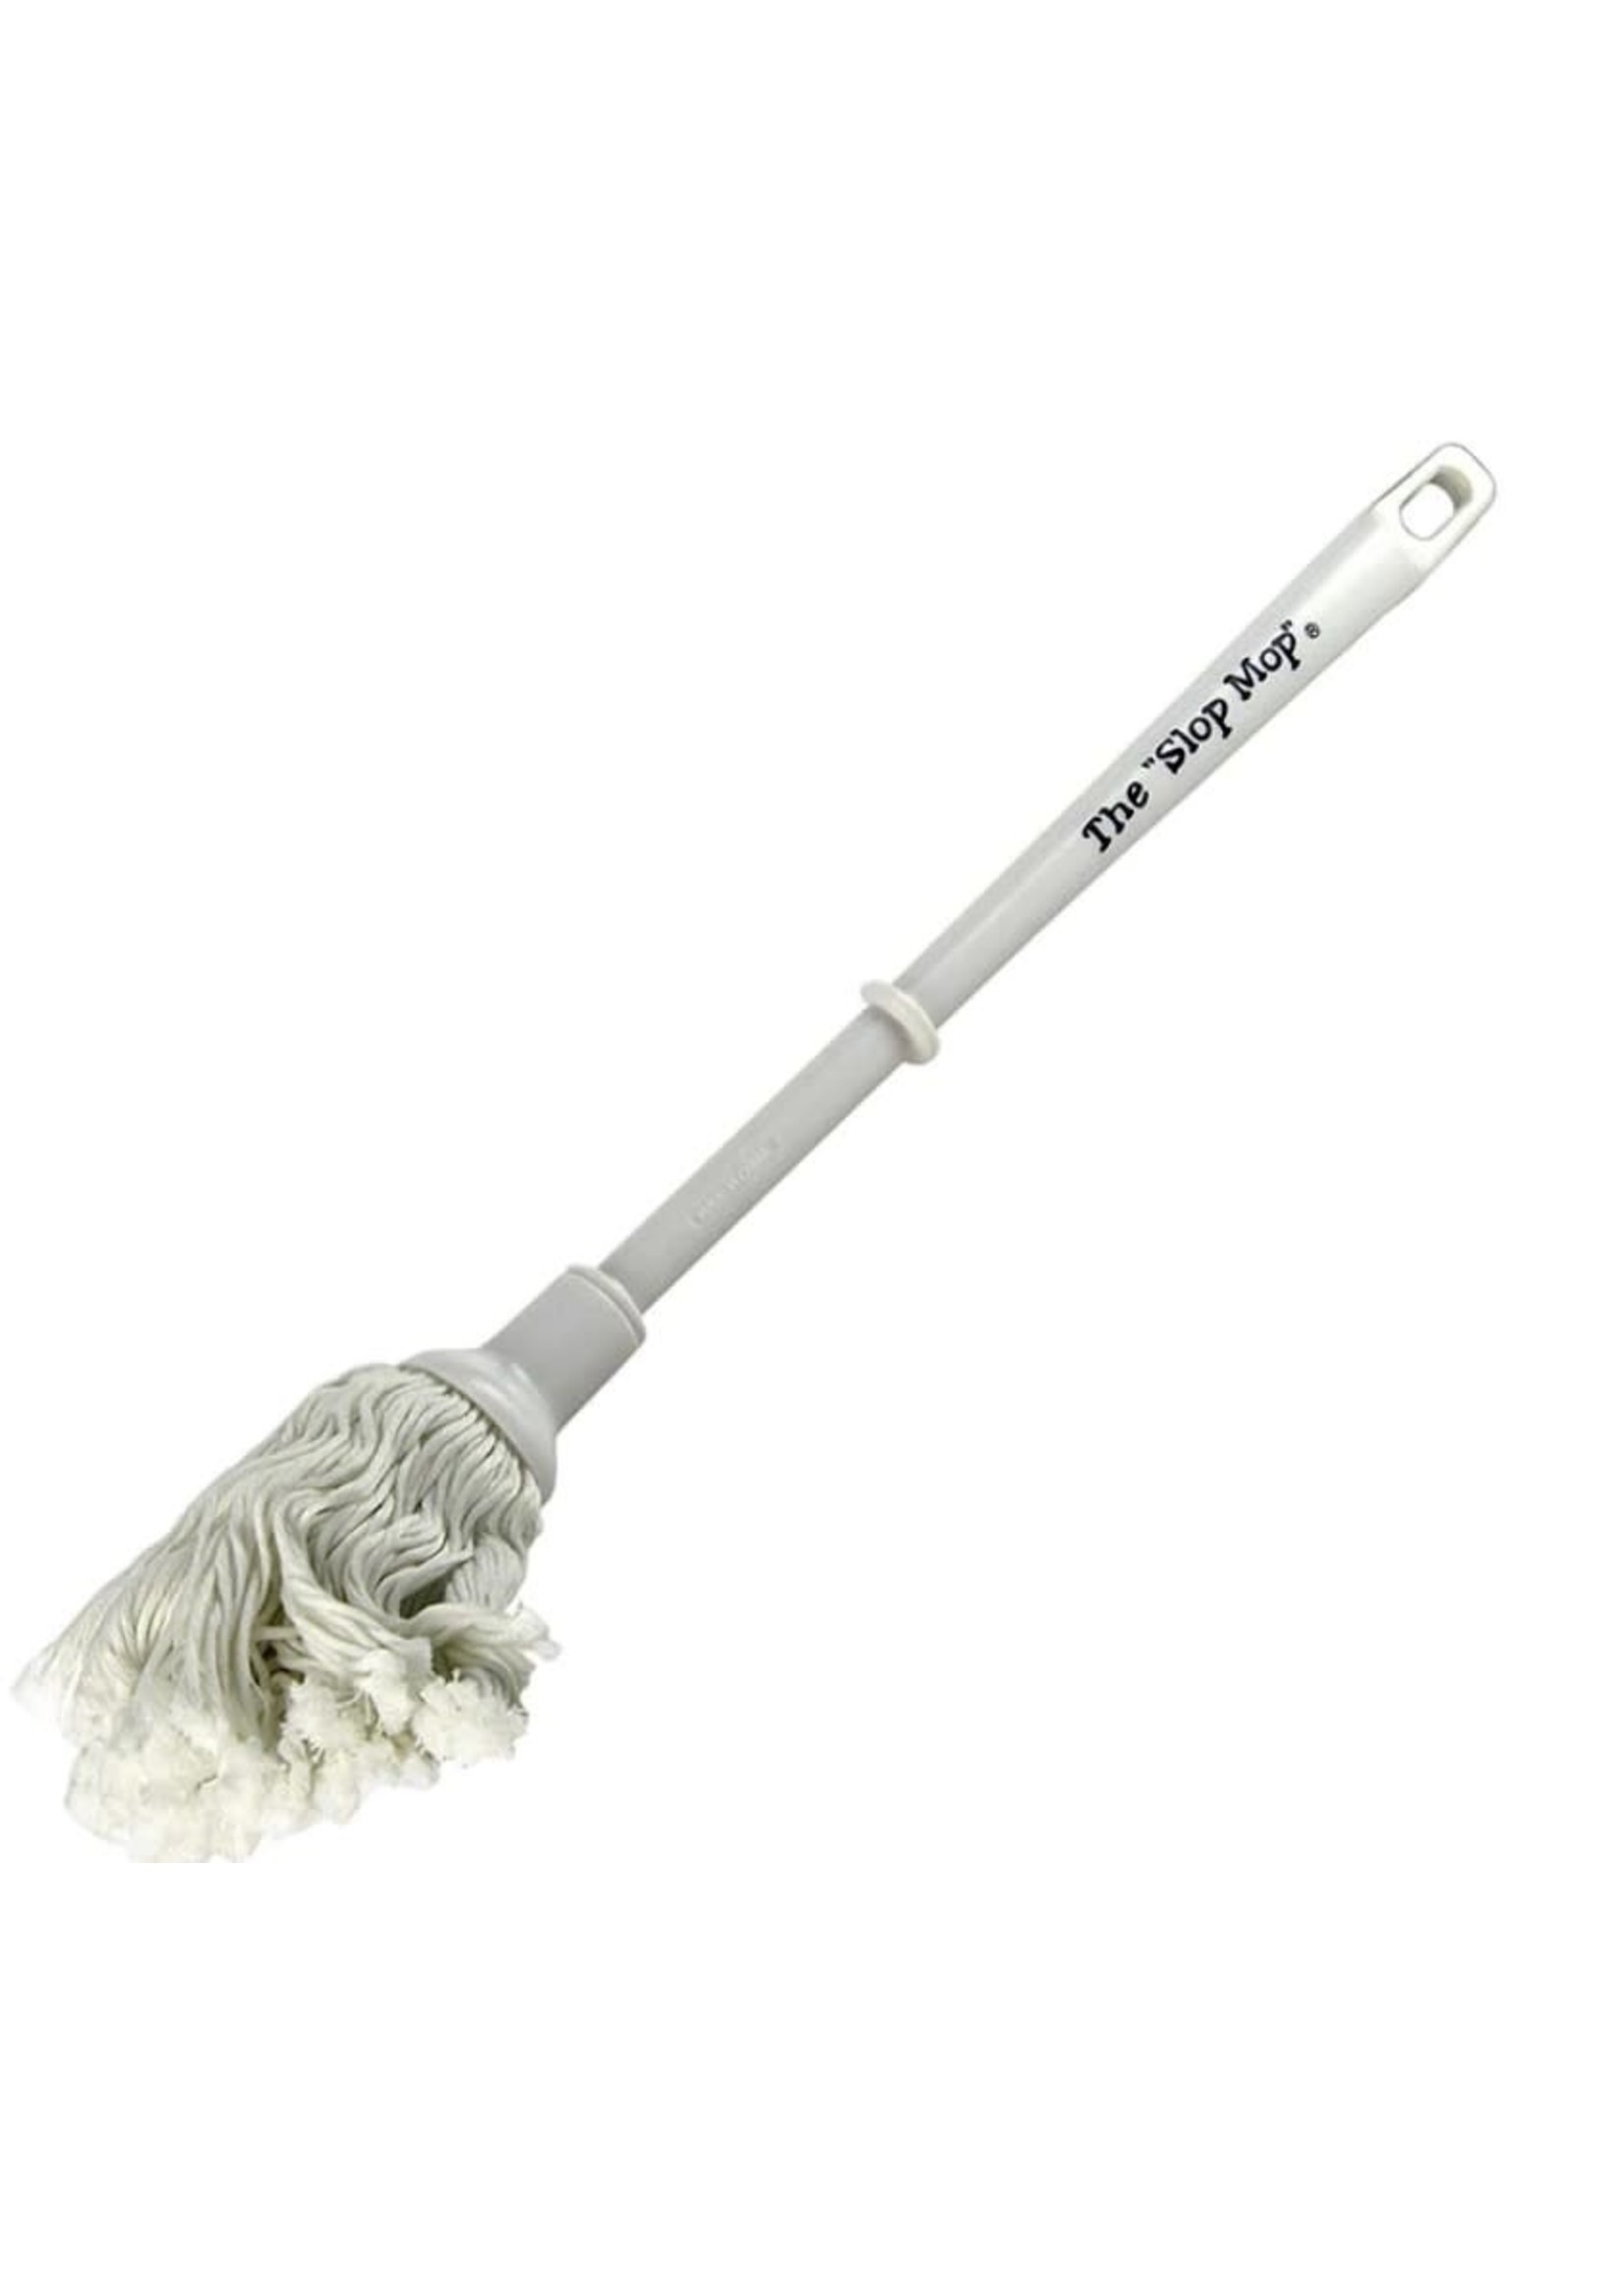 The Slop Mop Basting Brush